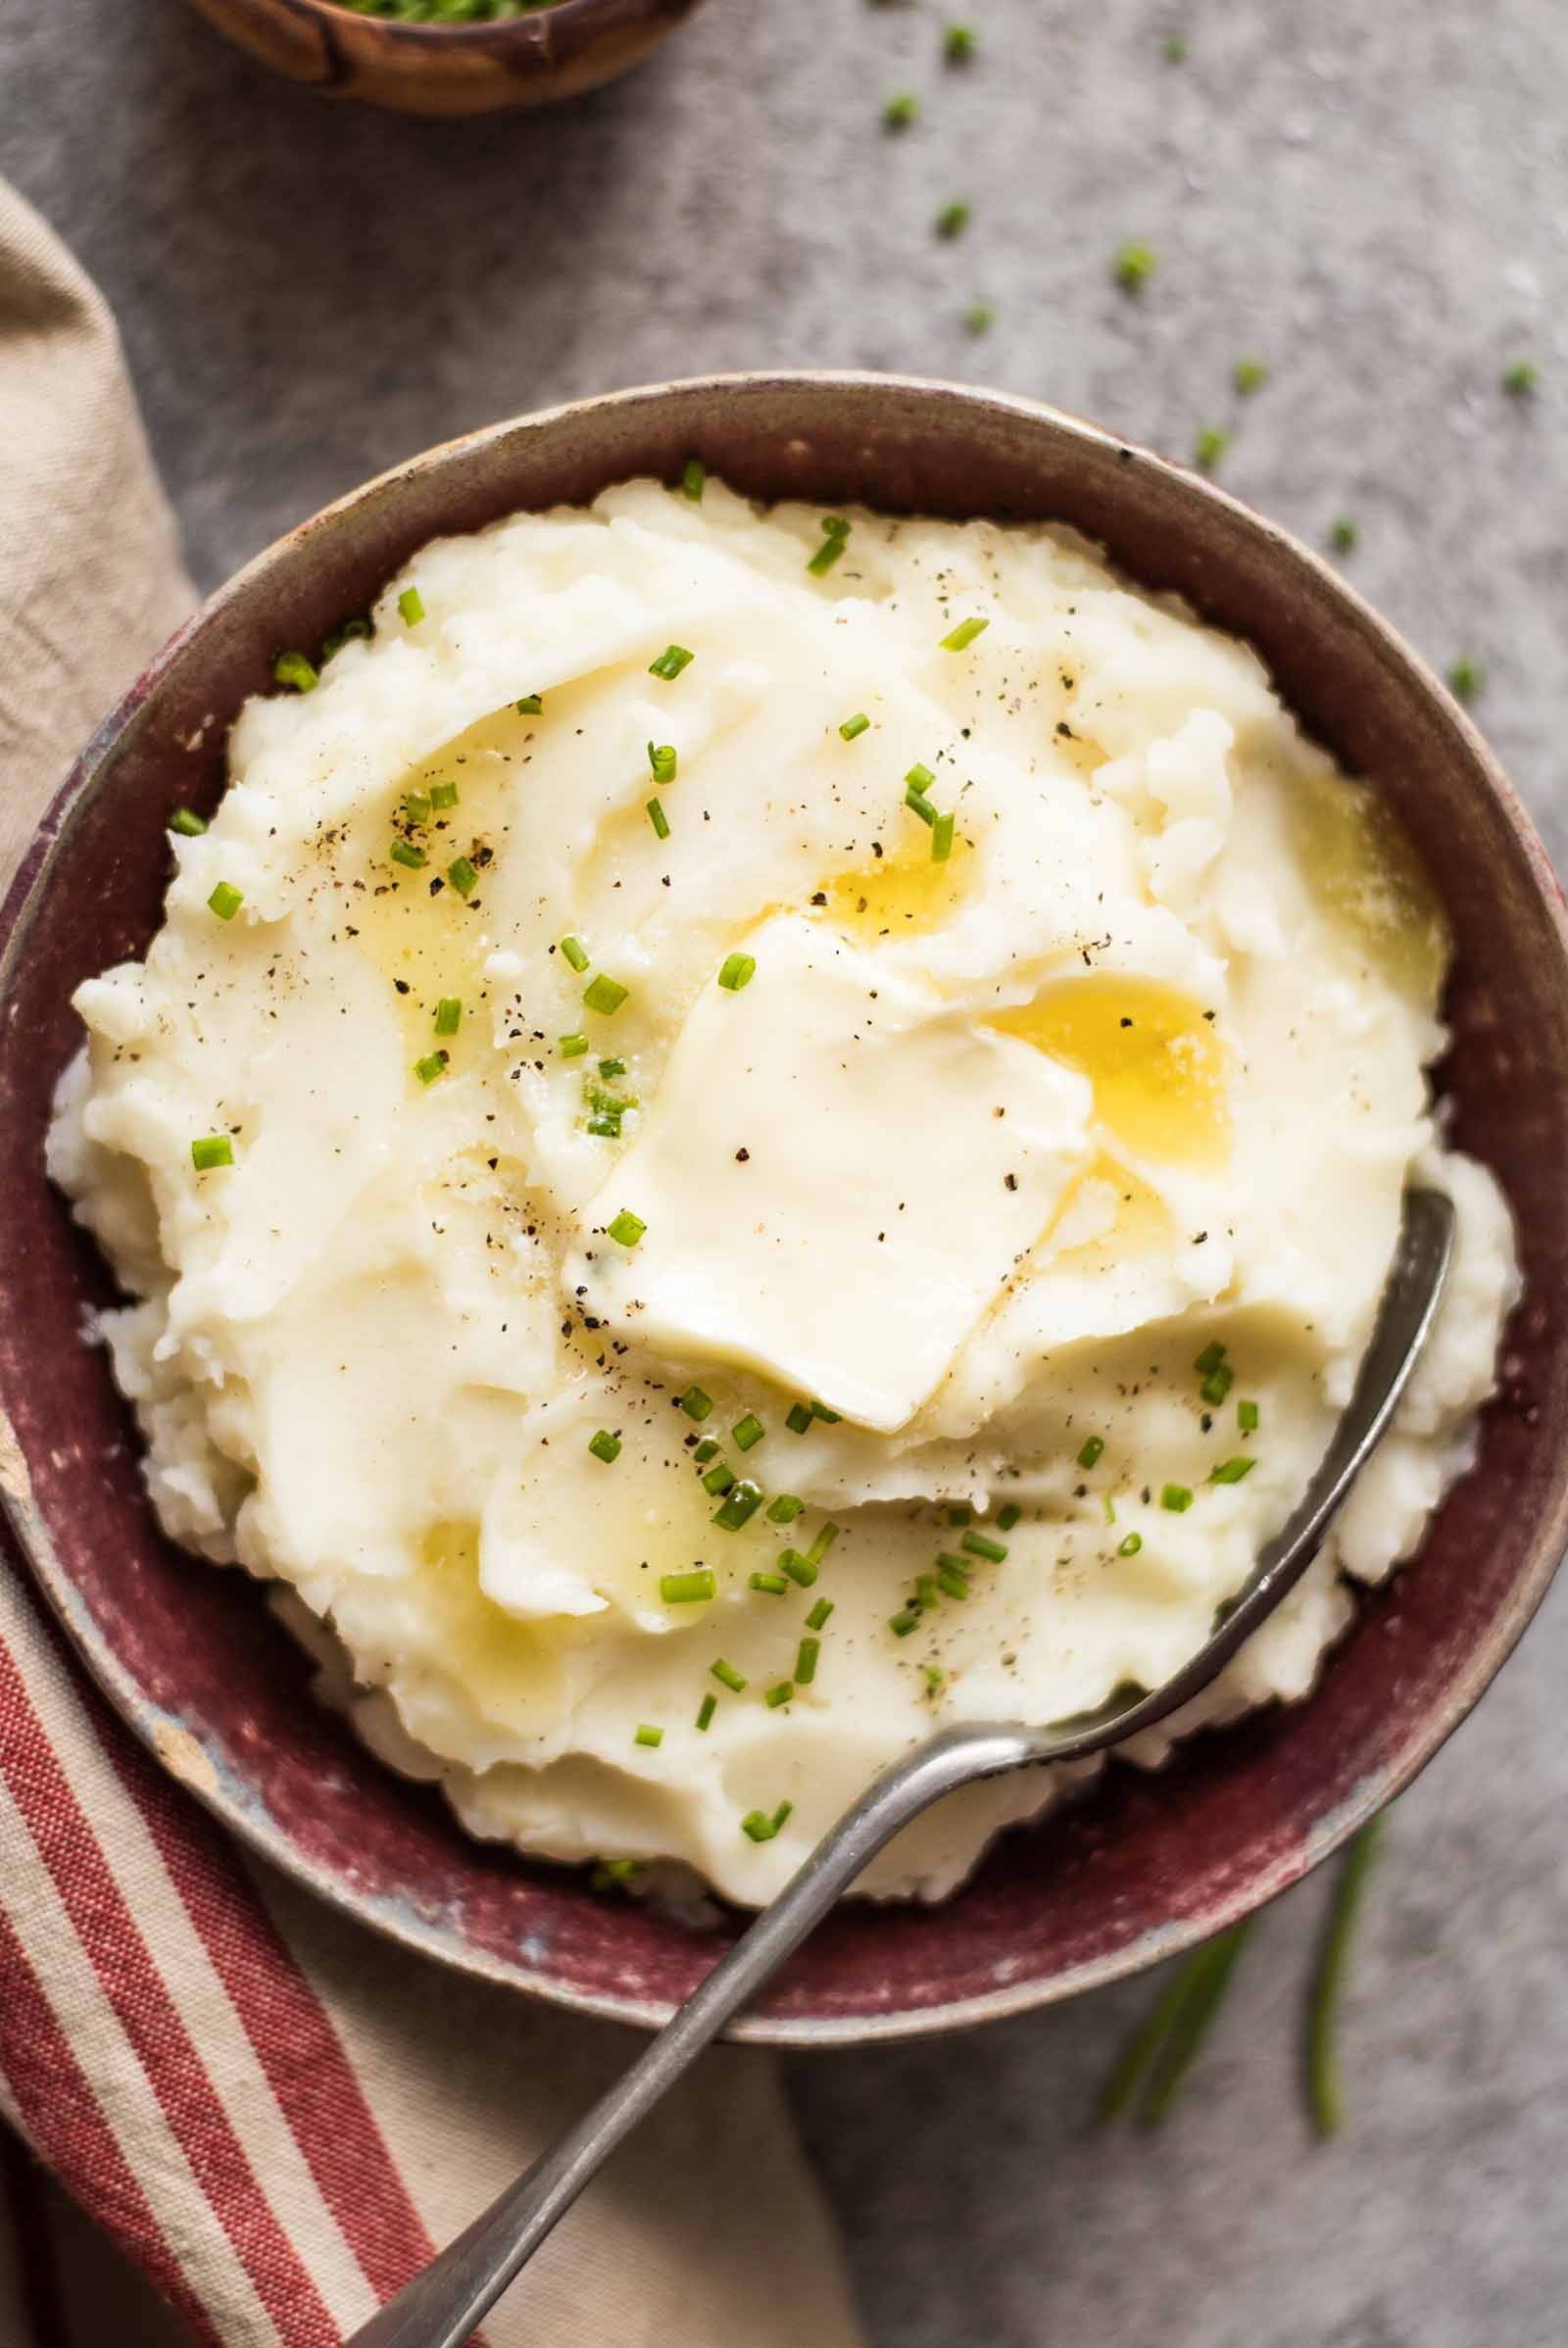 Mashed Potatoes Recipe For Thanksgiving
 Slow Cooker Mashed Potatoes Recipe